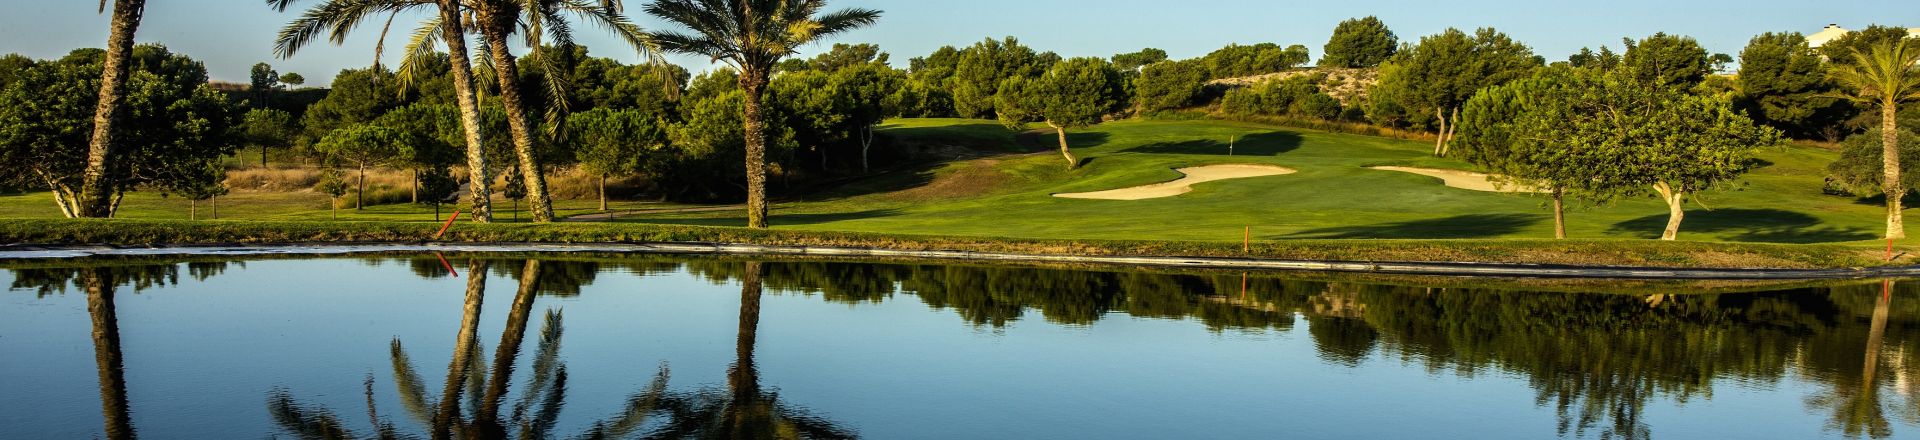 Embark on a golfing journey at Club de Golf Alenda, a prestigious golf course nestled in the enchanting landscapes of Alicante, Spain. Immerse yourself in the beauty of meticulously crafted fairways, scenic views, and world-class amenities, delivering an unmatched golfing experience in Alicante.